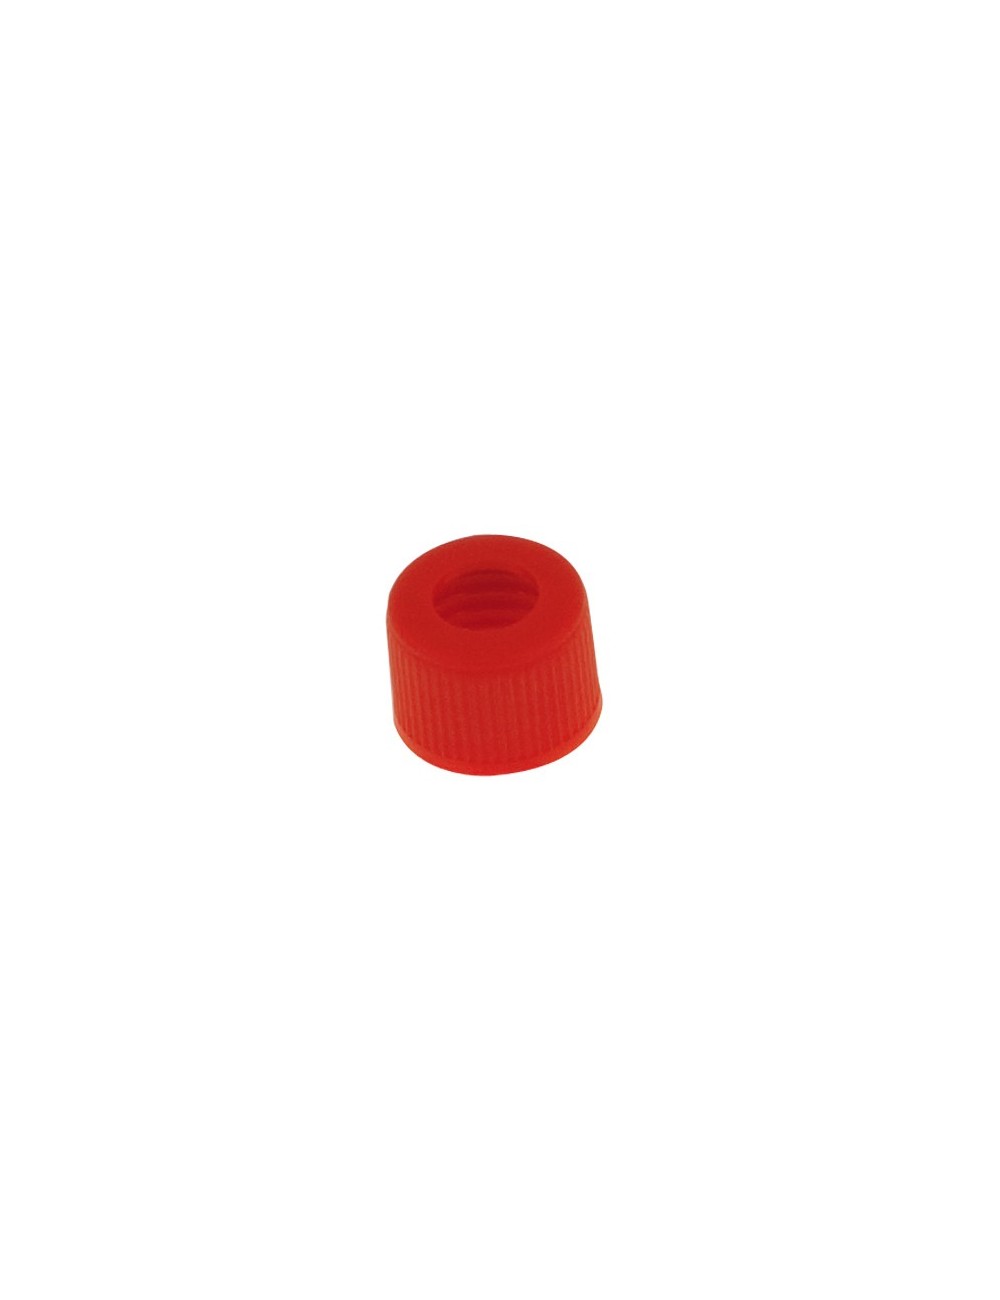 Small drilled plug for fuel tank Red